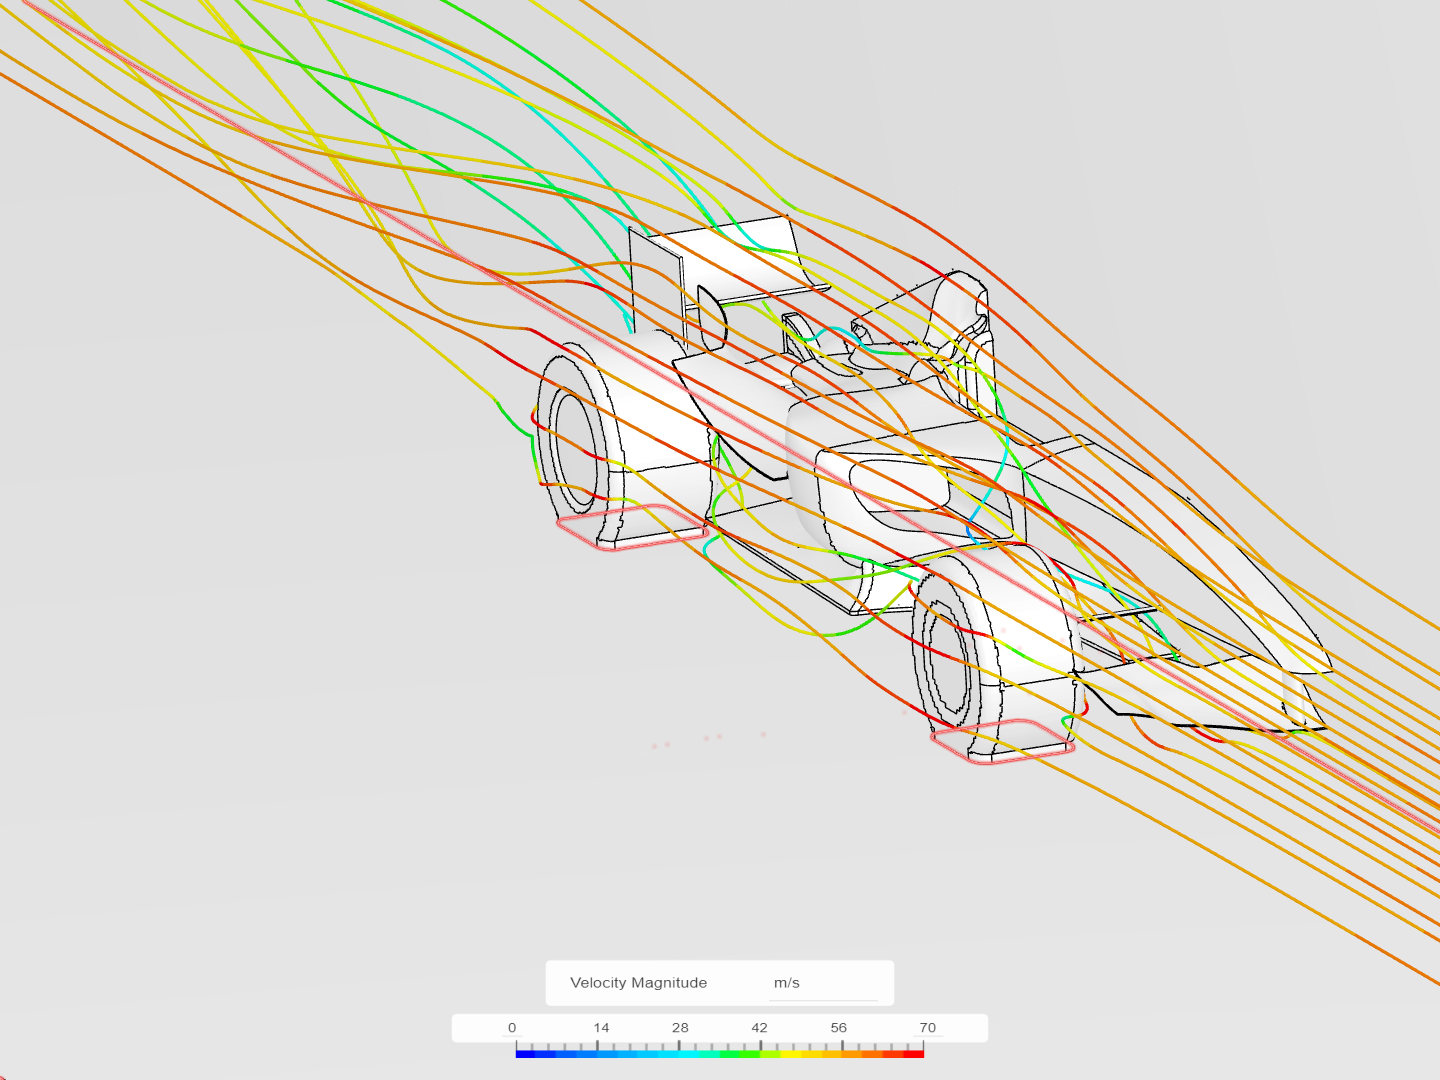 CFD Analysis of Airflow around a F1 Car to Test Aerodynamics by Ali_Arafat SimScale